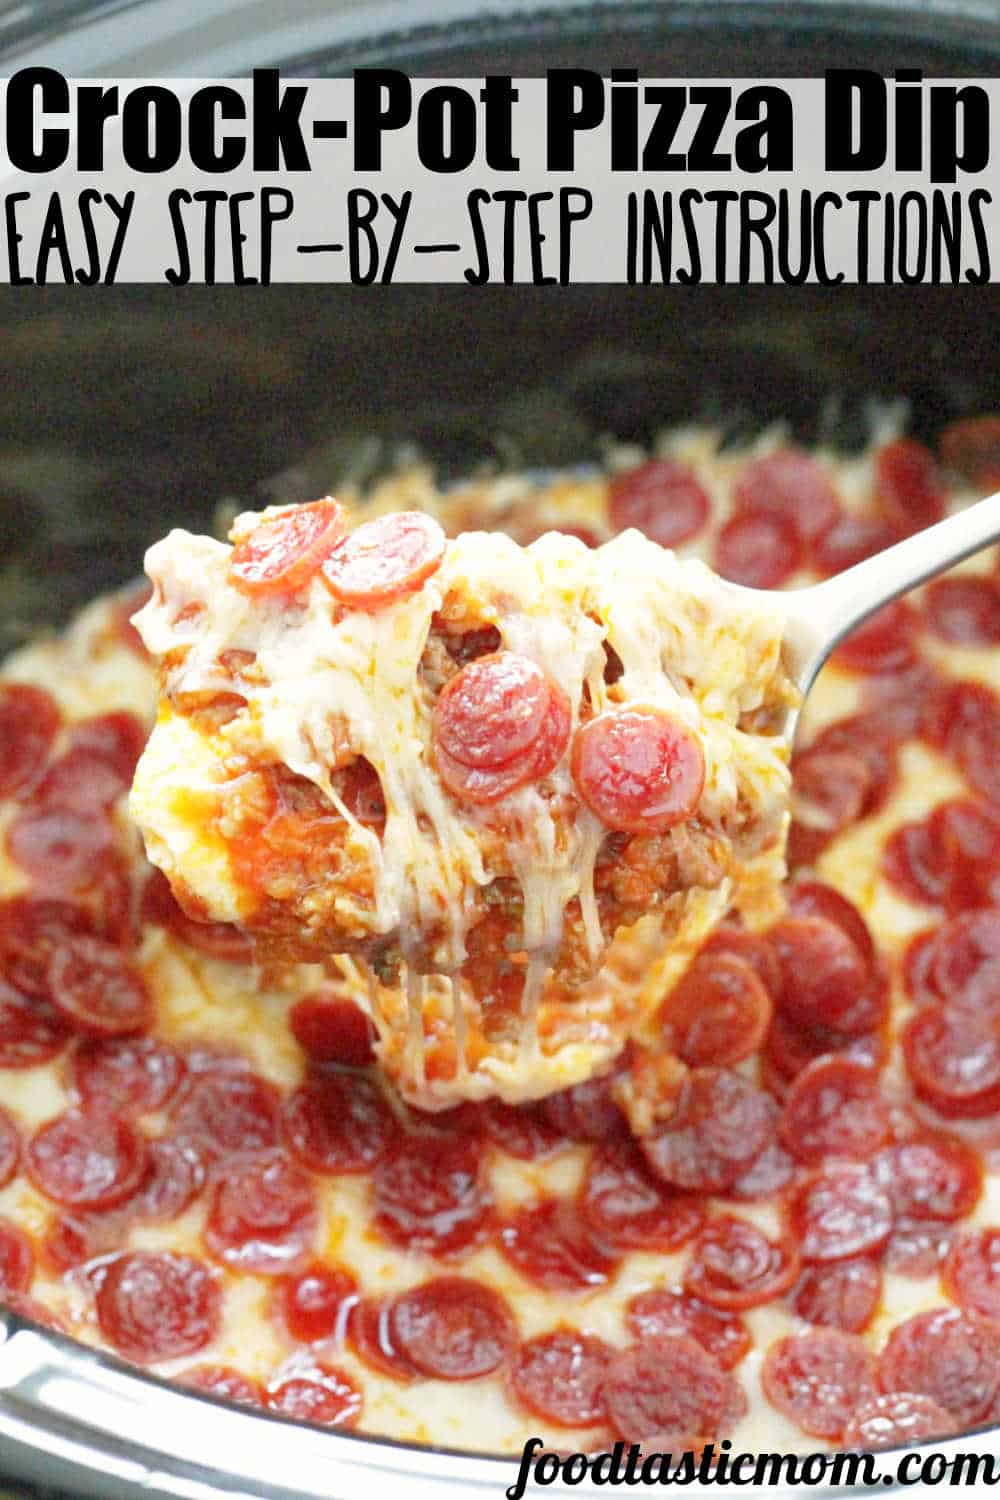 My Pizza Dip is loaded with cheese, pepperoni and sausage and is made for the slow cooker, so the cheese stays hot and melty. via @foodtasticmom